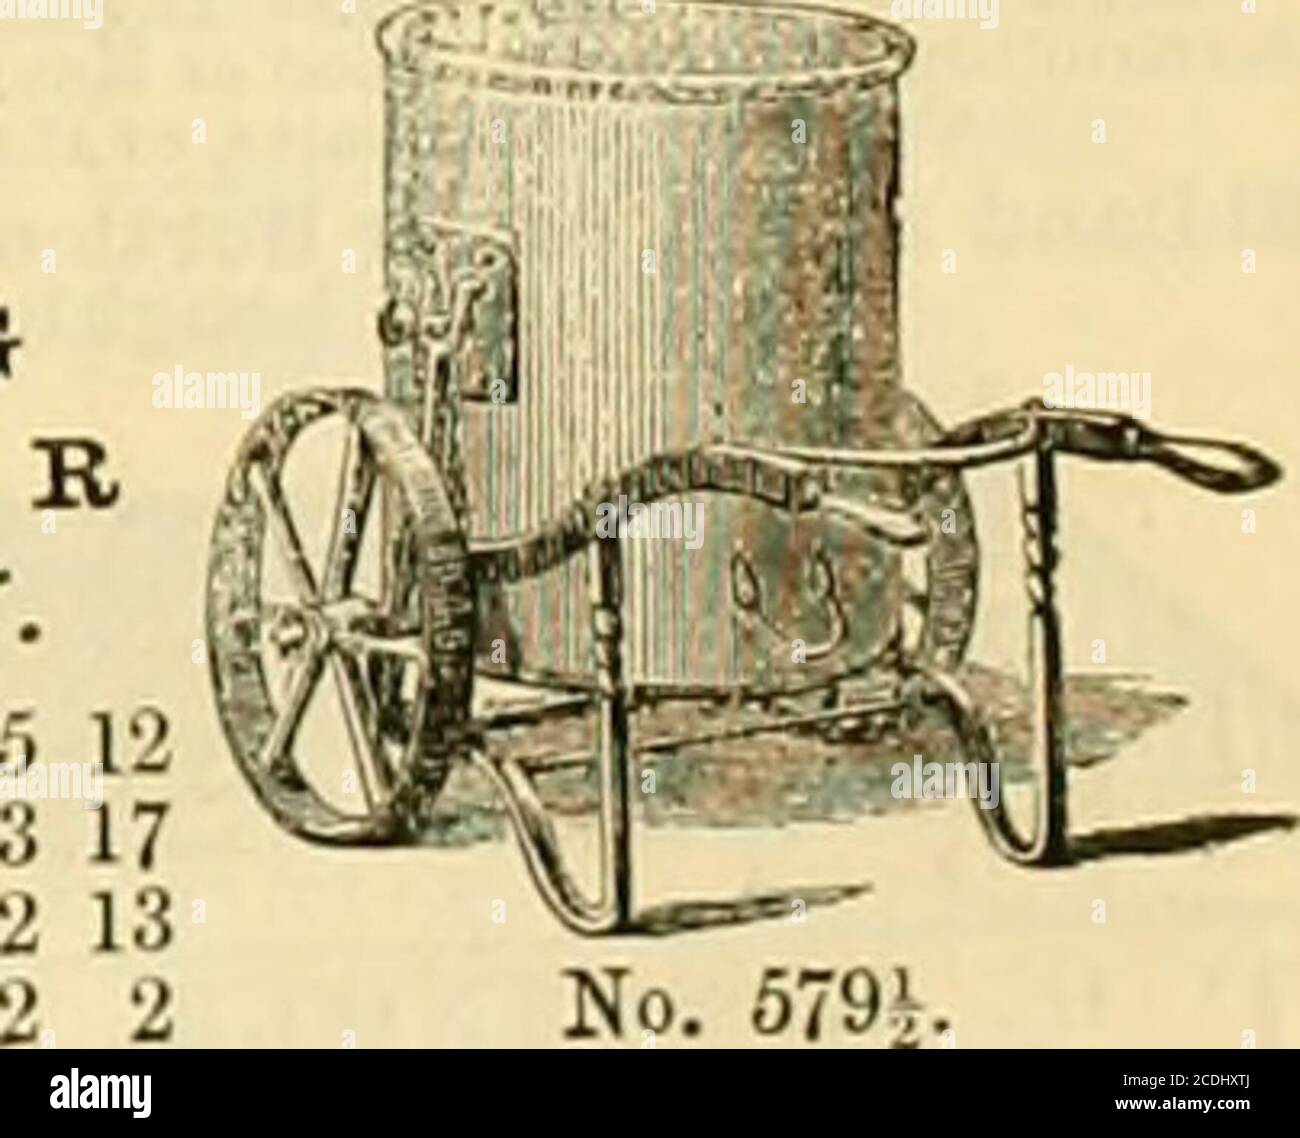 . The Gardeners' chronicle and agricultural gazette . No. 5791. SWING WATER BARROW. 50 Gals. .. £•. 138 „30 „ ROYAL AGRICULTURAL SHOW, held atBURY ST. EDMUNDS, 1807. — A SILVERMEDAL was Awarded to JOHN WARNERA.-D SONS CHAIN PUMP. ThLi Pump, fromthe entire absence of Valves, is especially adaptedfor the use of Builders, Contractors, and Farmers. WIND ENGINES, ADAPTED FOR PUMPING, CHAFF-CUTTING, GRINDING, &o. ..,. ,he lat« JOHN WARNER A.n SONS beg to inform the Trade and the Publi. generally that they have purchased the Patterns of the WIND ENGLVES manufactured bj firm of Messrs. BuBY & Pollard Stock Photo